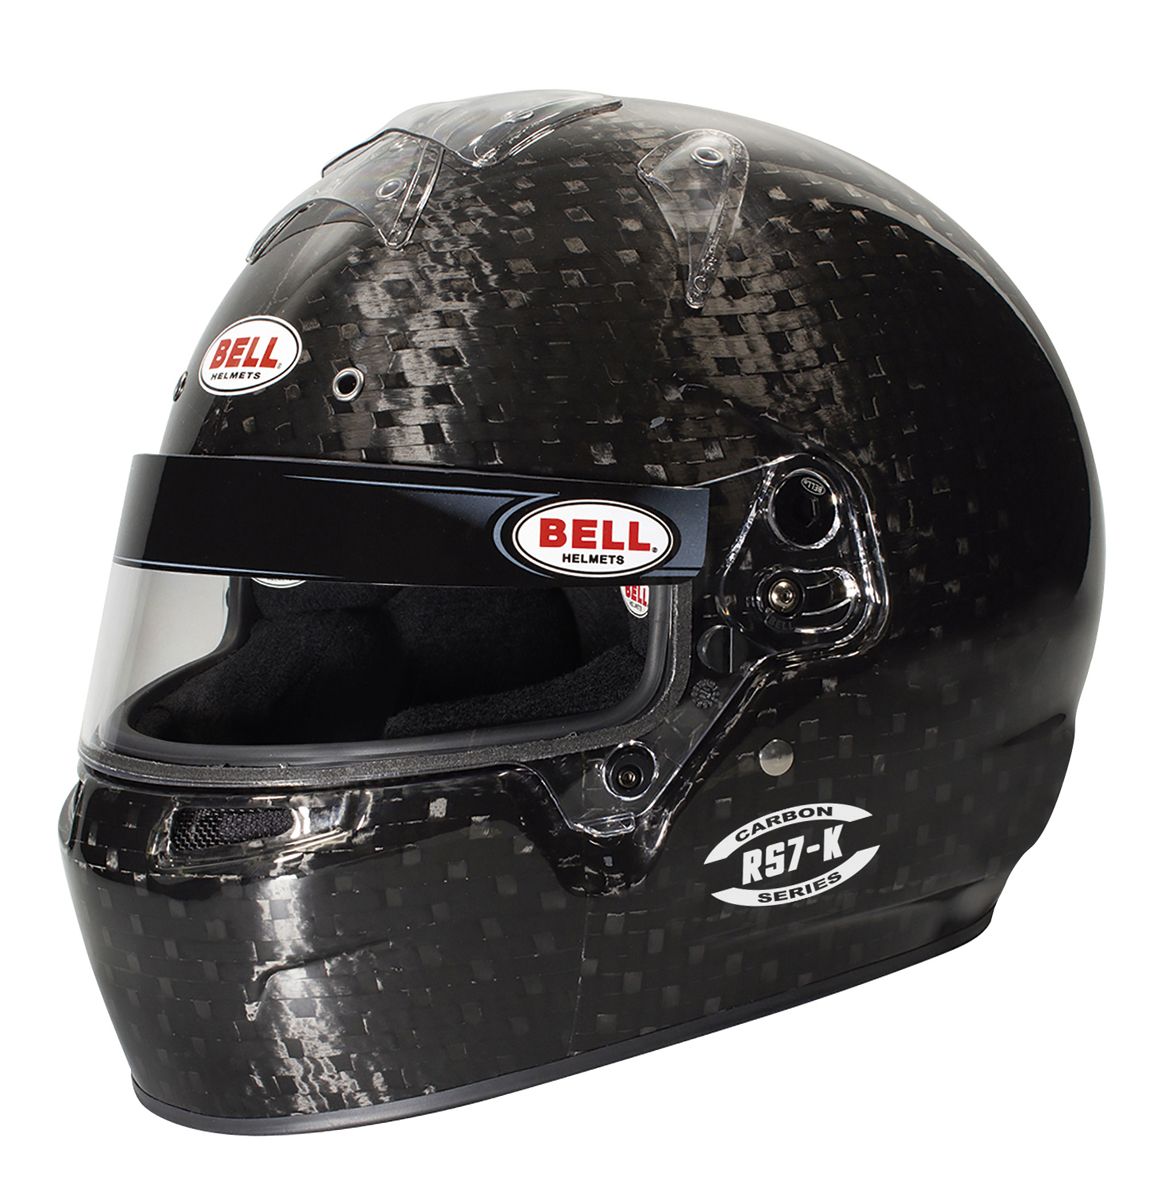 Bell® - RS7-K CARBON